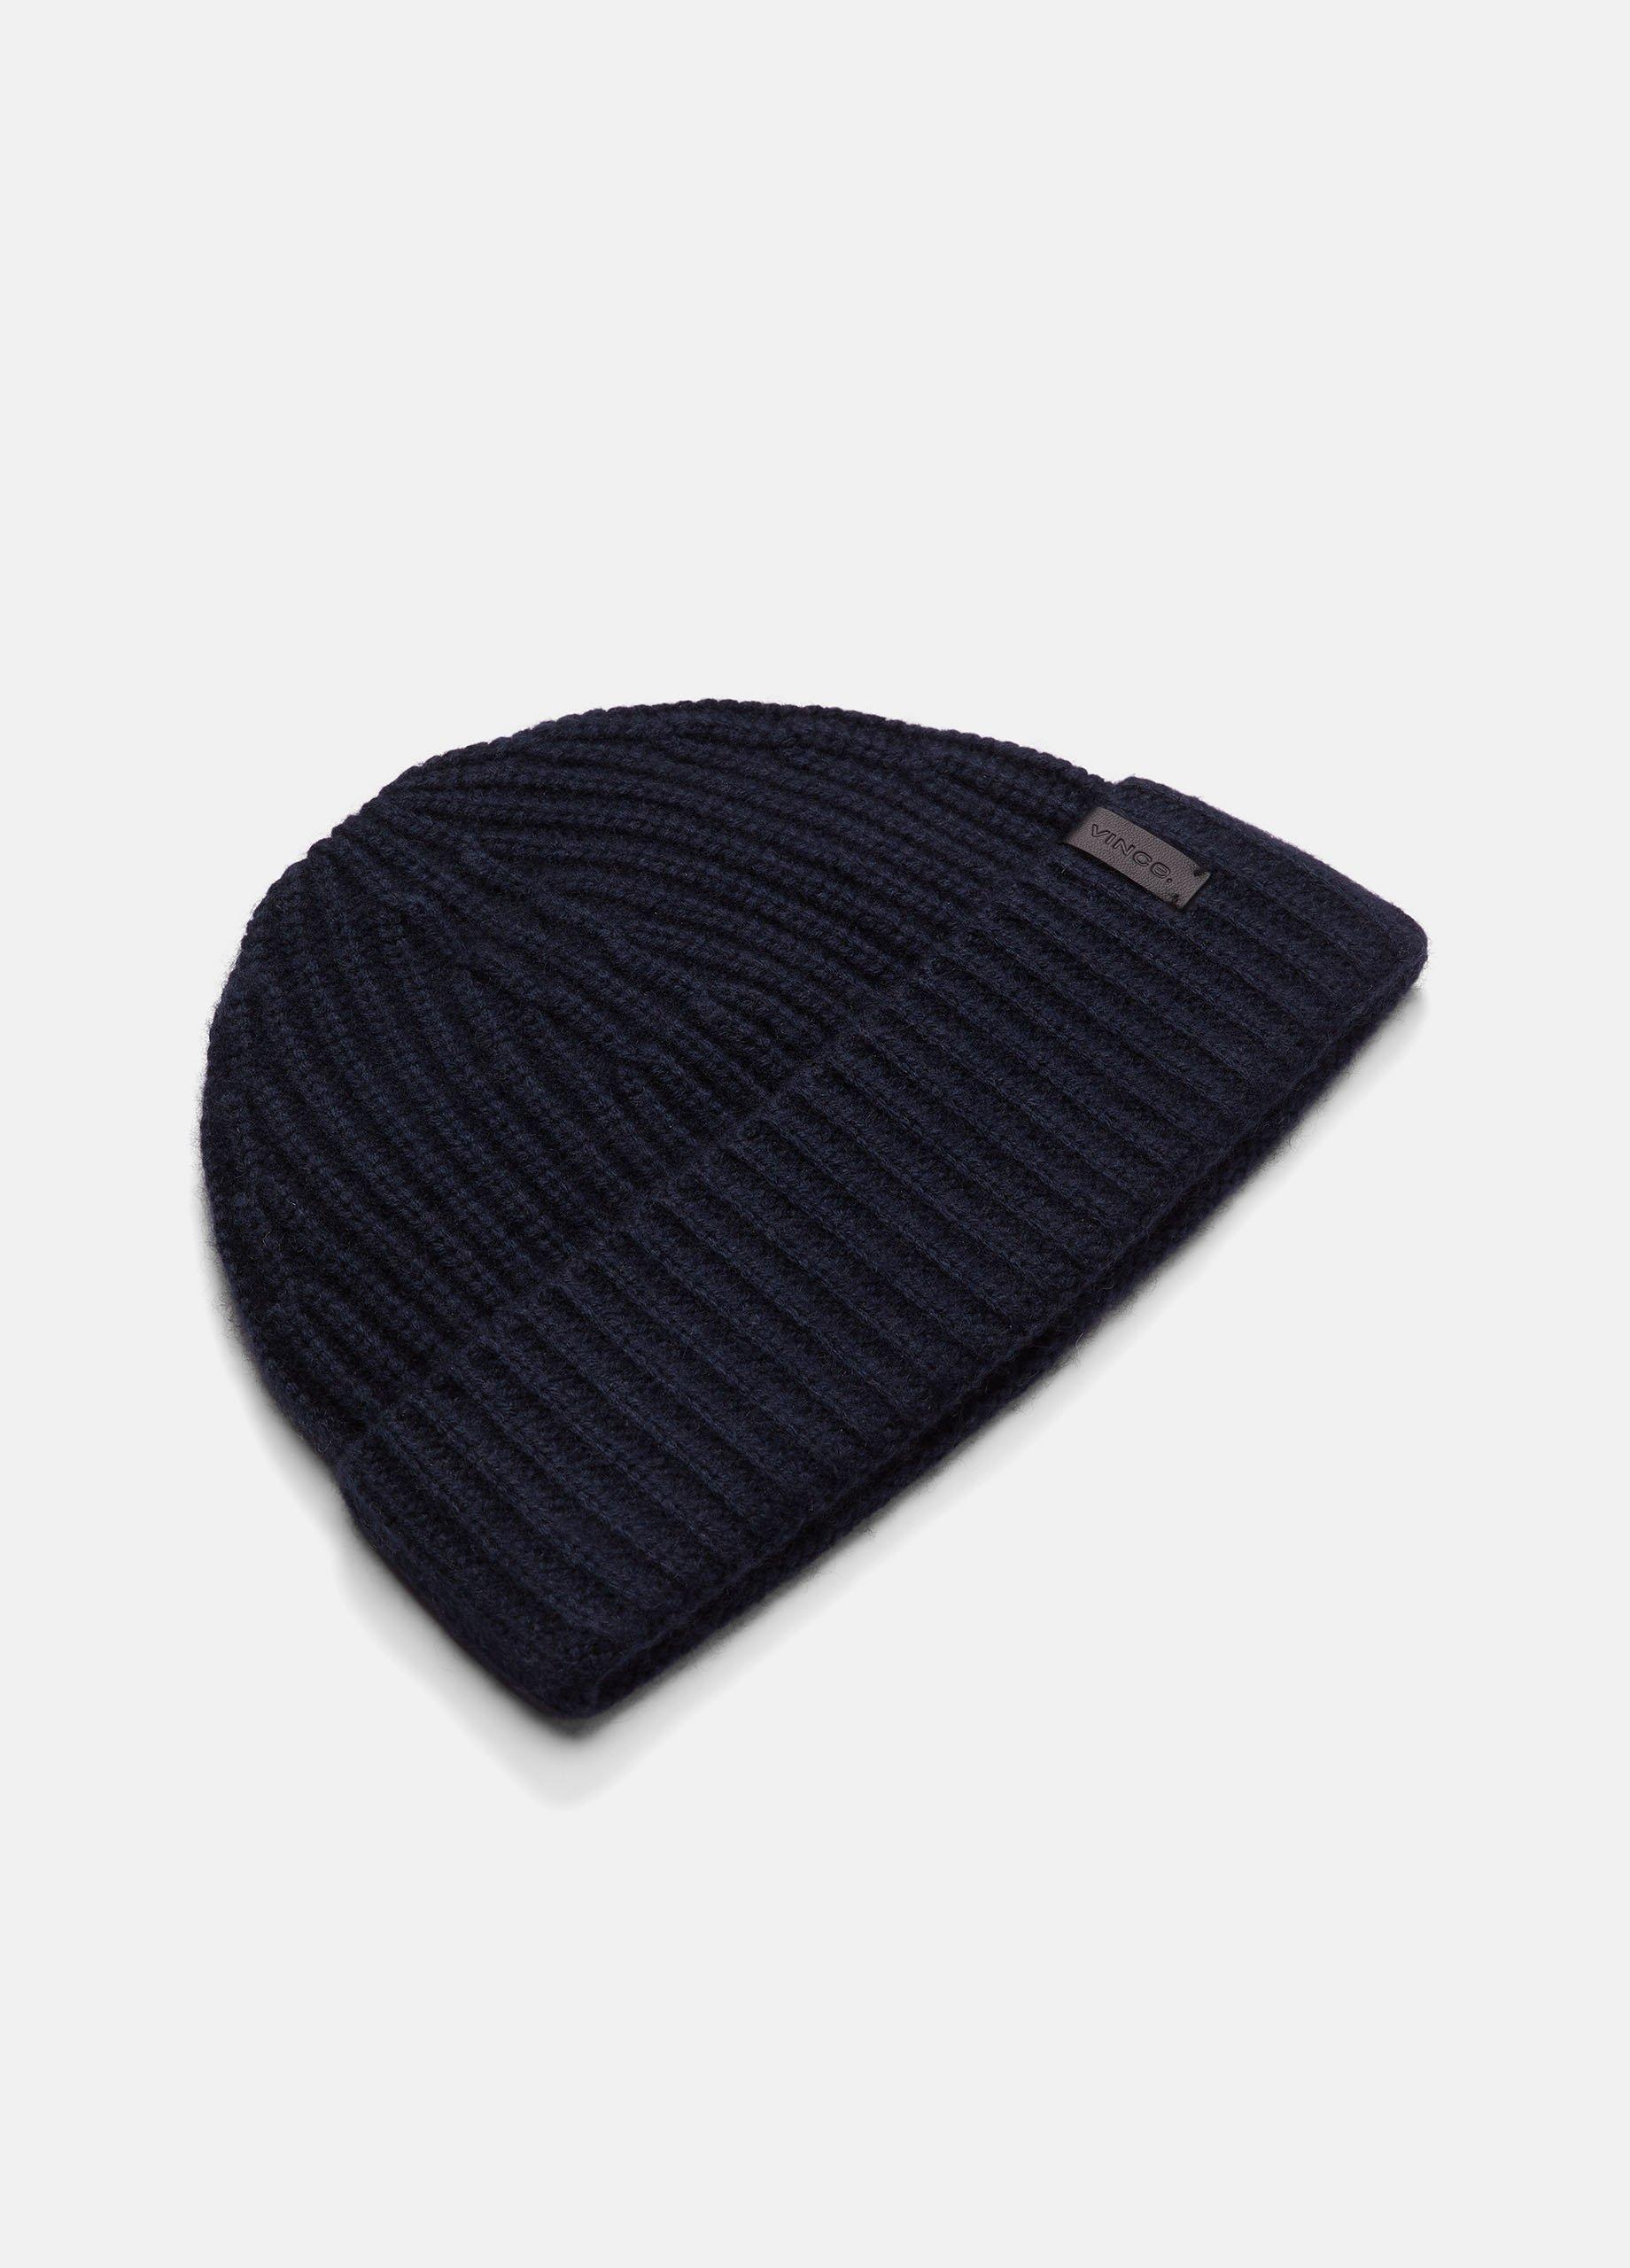 Wool-Cashmere Shaker-Stitch Hat in Accessories | Vince